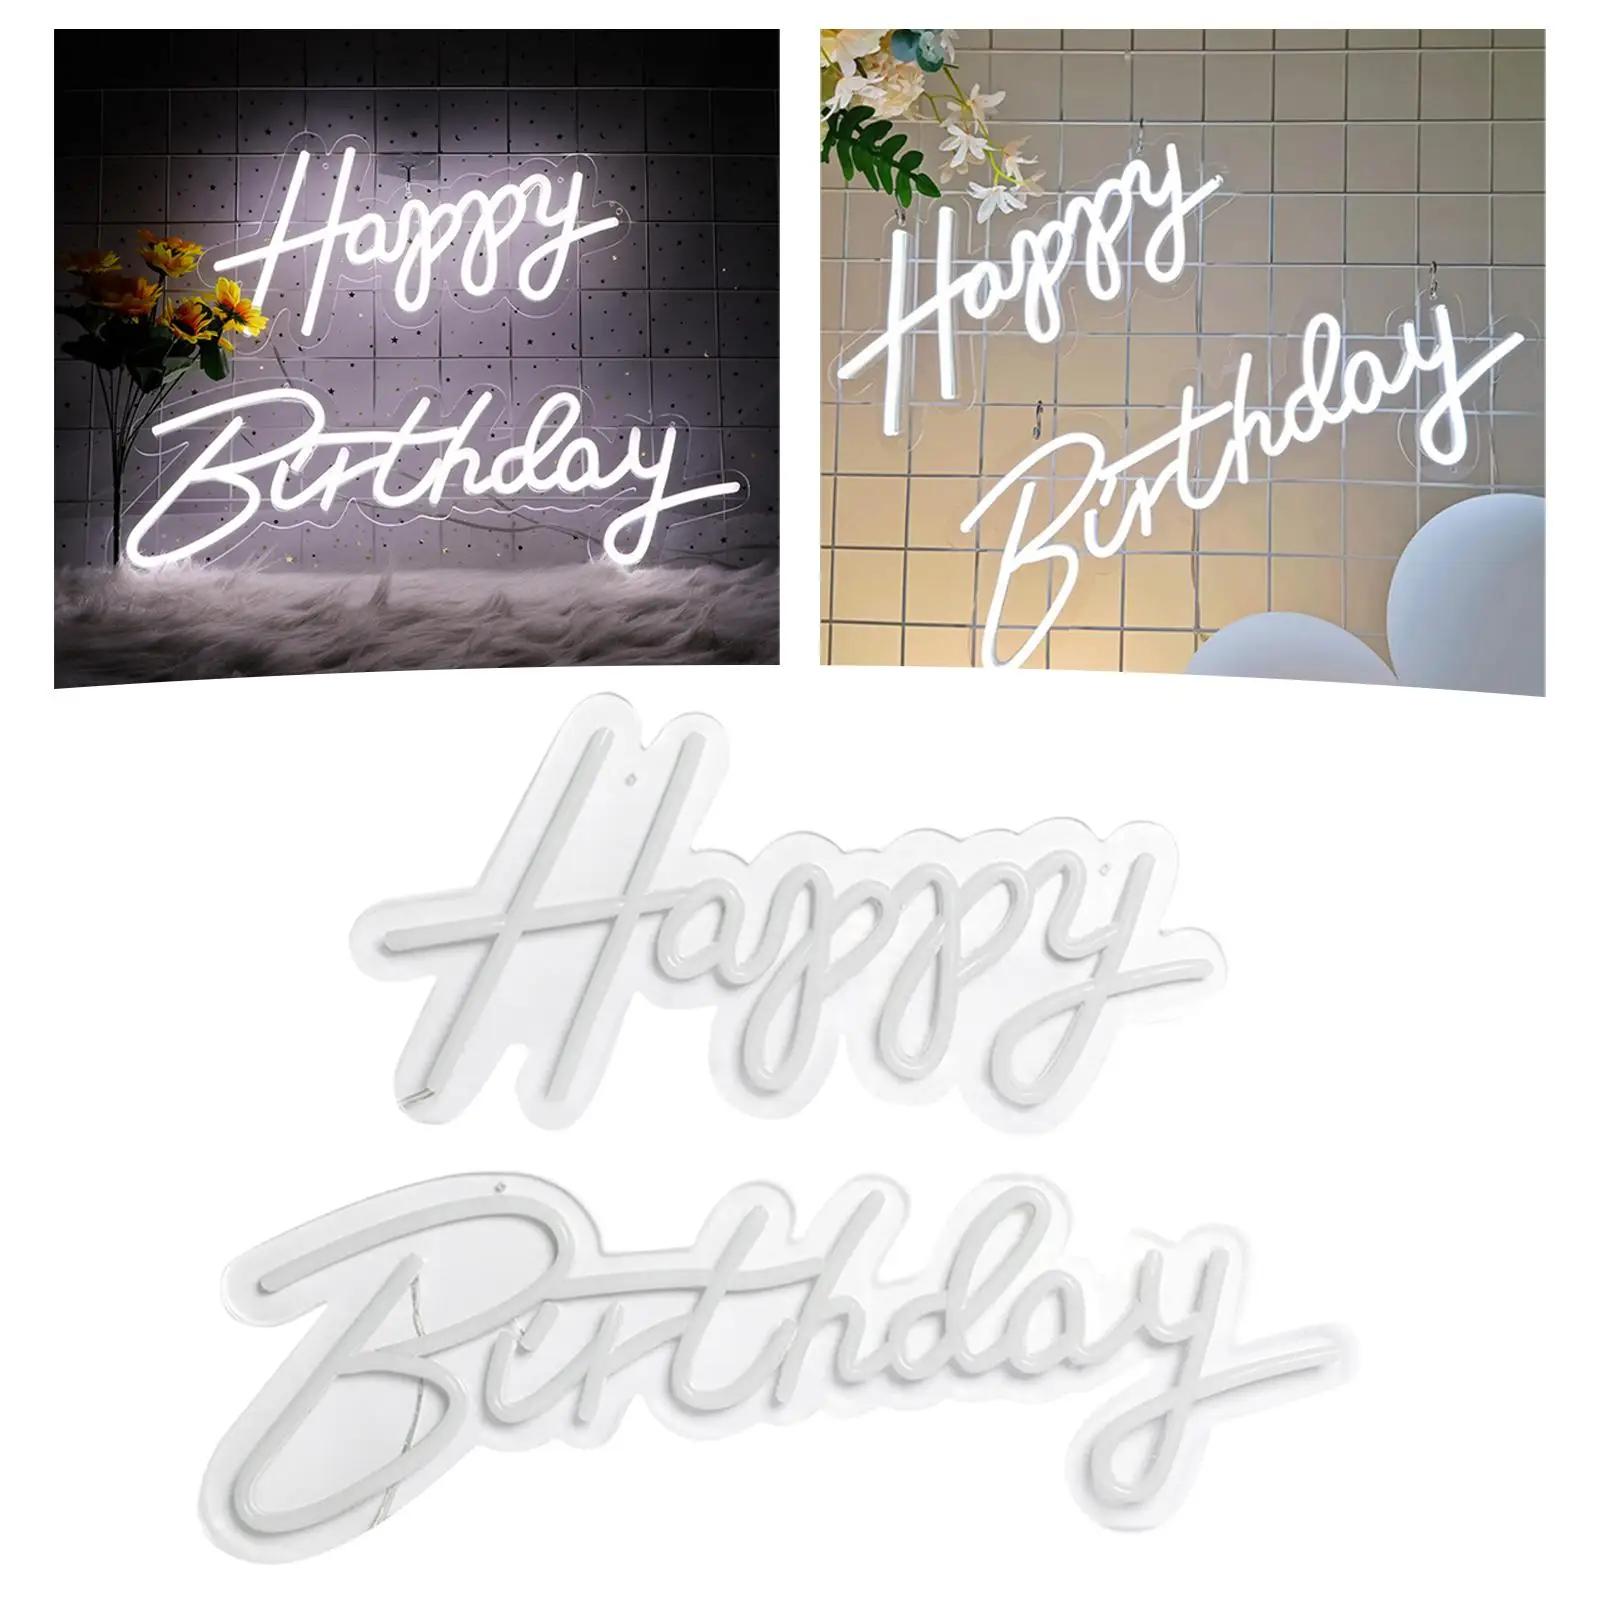 Happy Birthday Neon Sign LED Neon Lamp Banner Lamp Separate Words Reusable Easy to Install for Background Bar Club Wall Art Deco